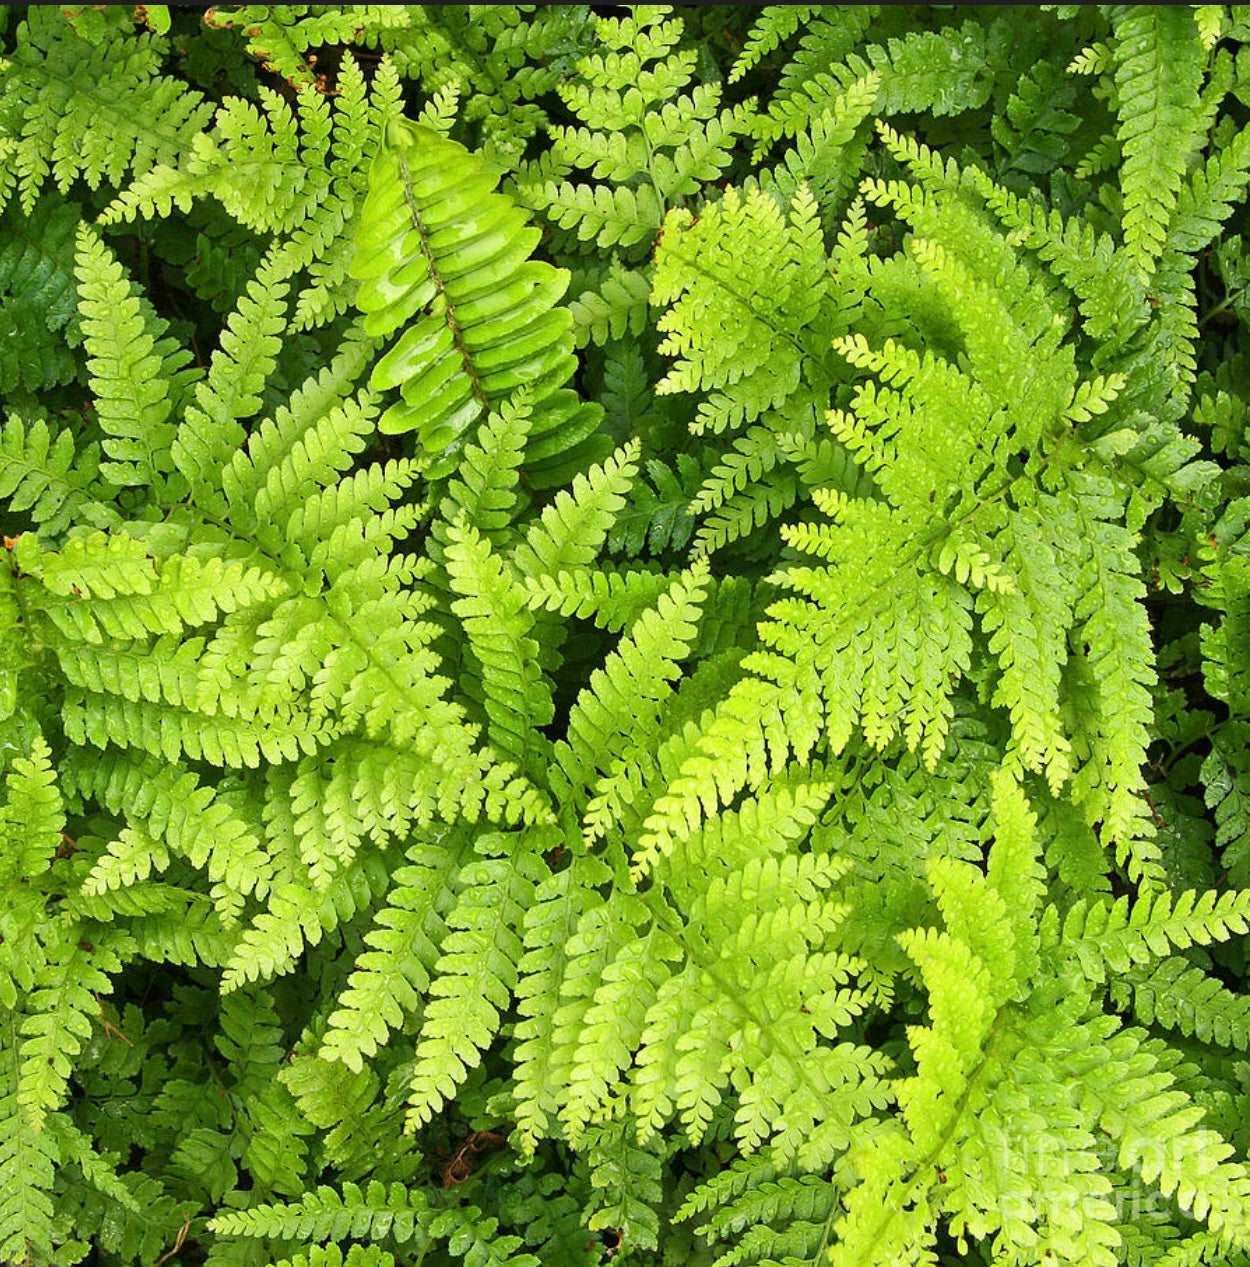 Lace Fern Microlepia strigosa Plant One Gallon Size Healthy Harvesters